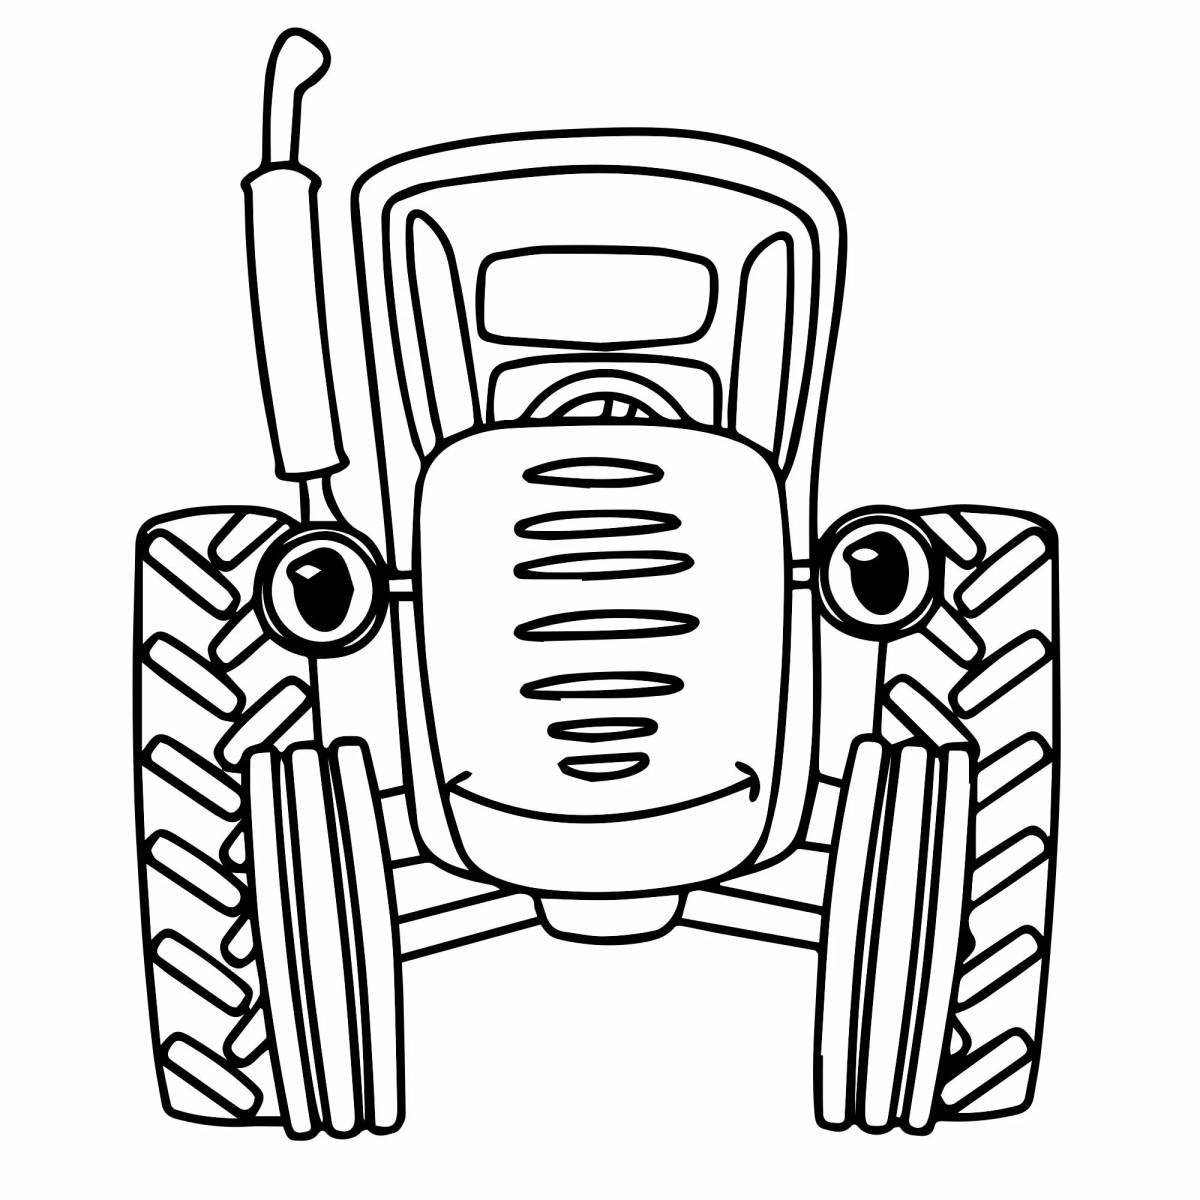 Fun drawing of a tractor for kids